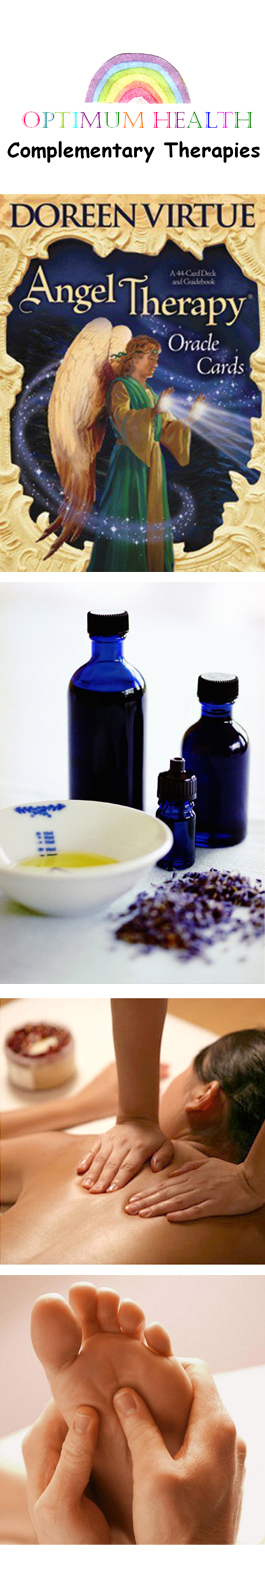 Profile picture for Optimum Health Complementary Therapies